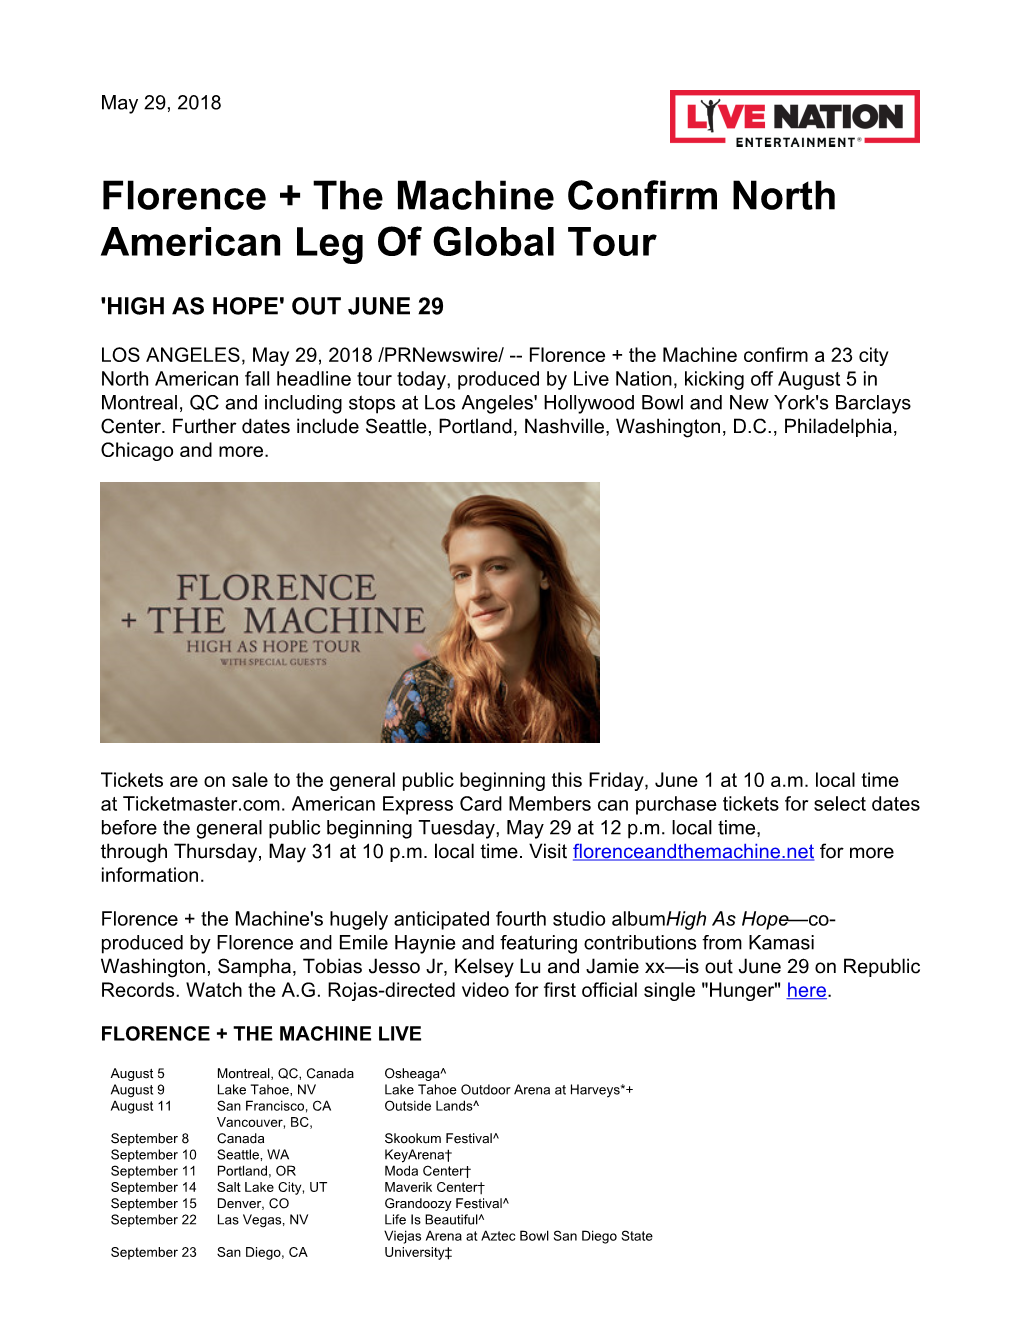 Florence + the Machine Confirm North American Leg of Global Tour